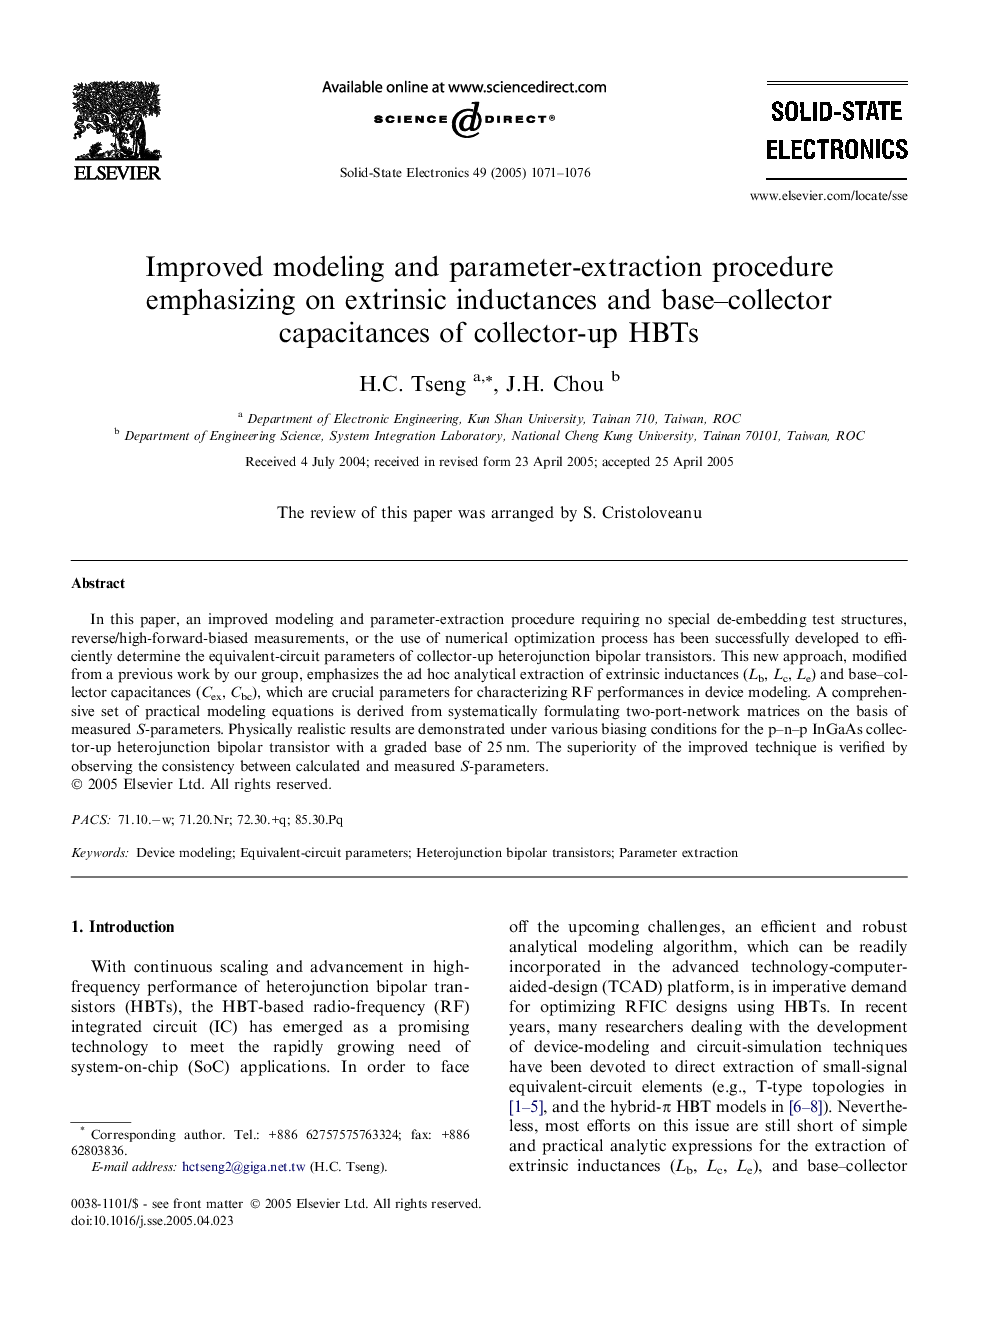 Improved modeling and parameter-extraction procedure emphasizing on extrinsic inductances and base-collector capacitances of collector-up HBTs